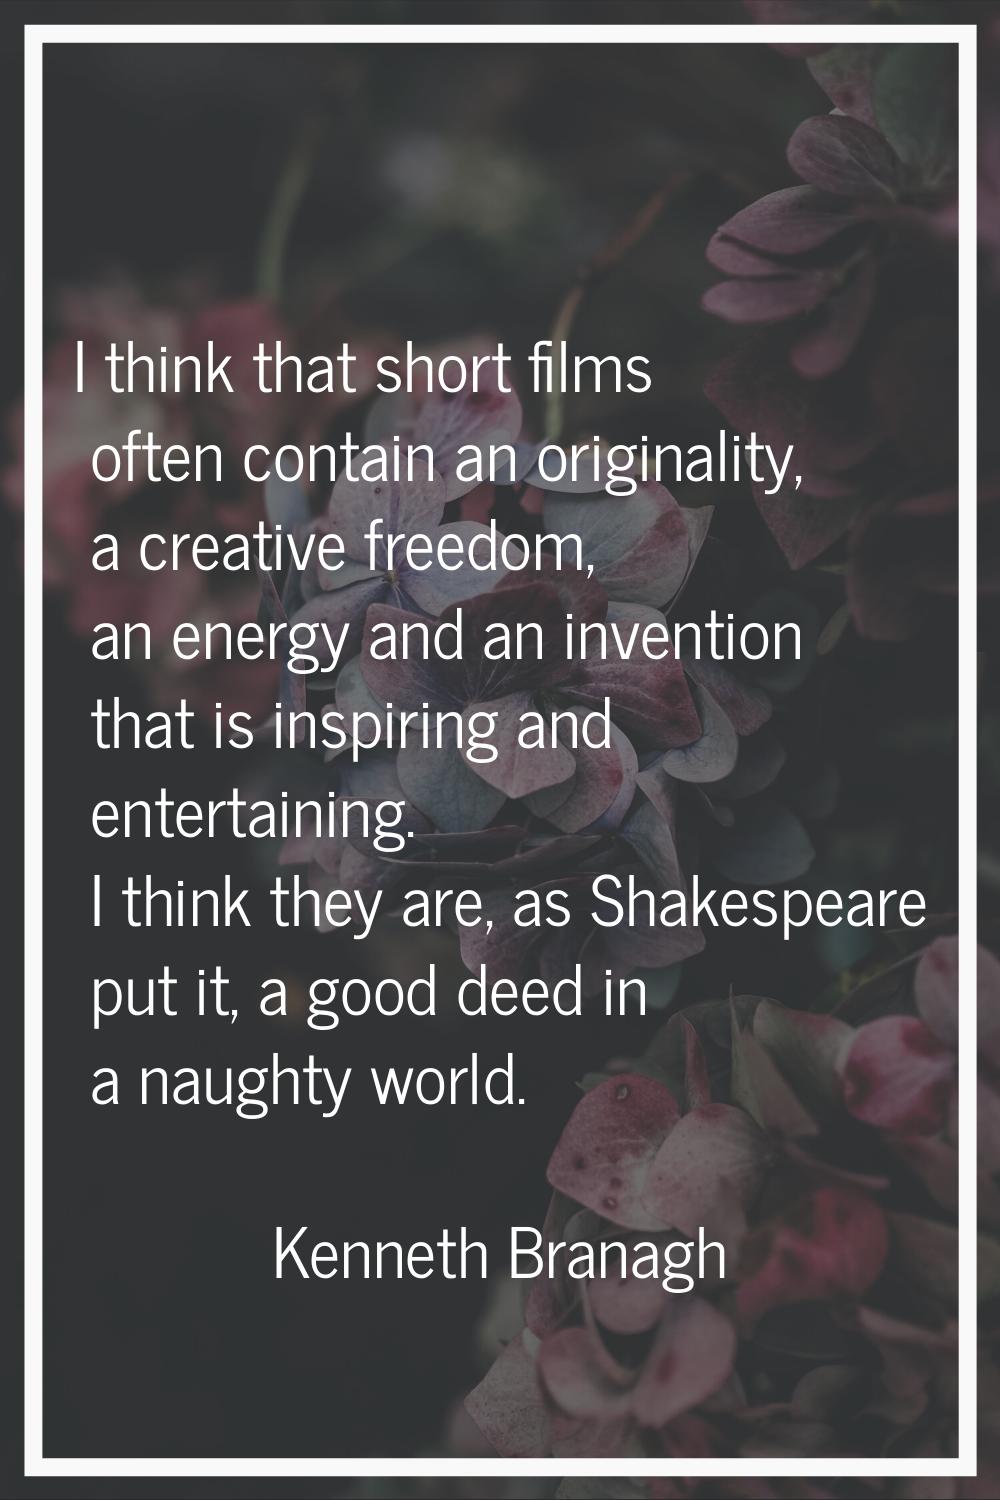 I think that short films often contain an originality, a creative freedom, an energy and an inventi